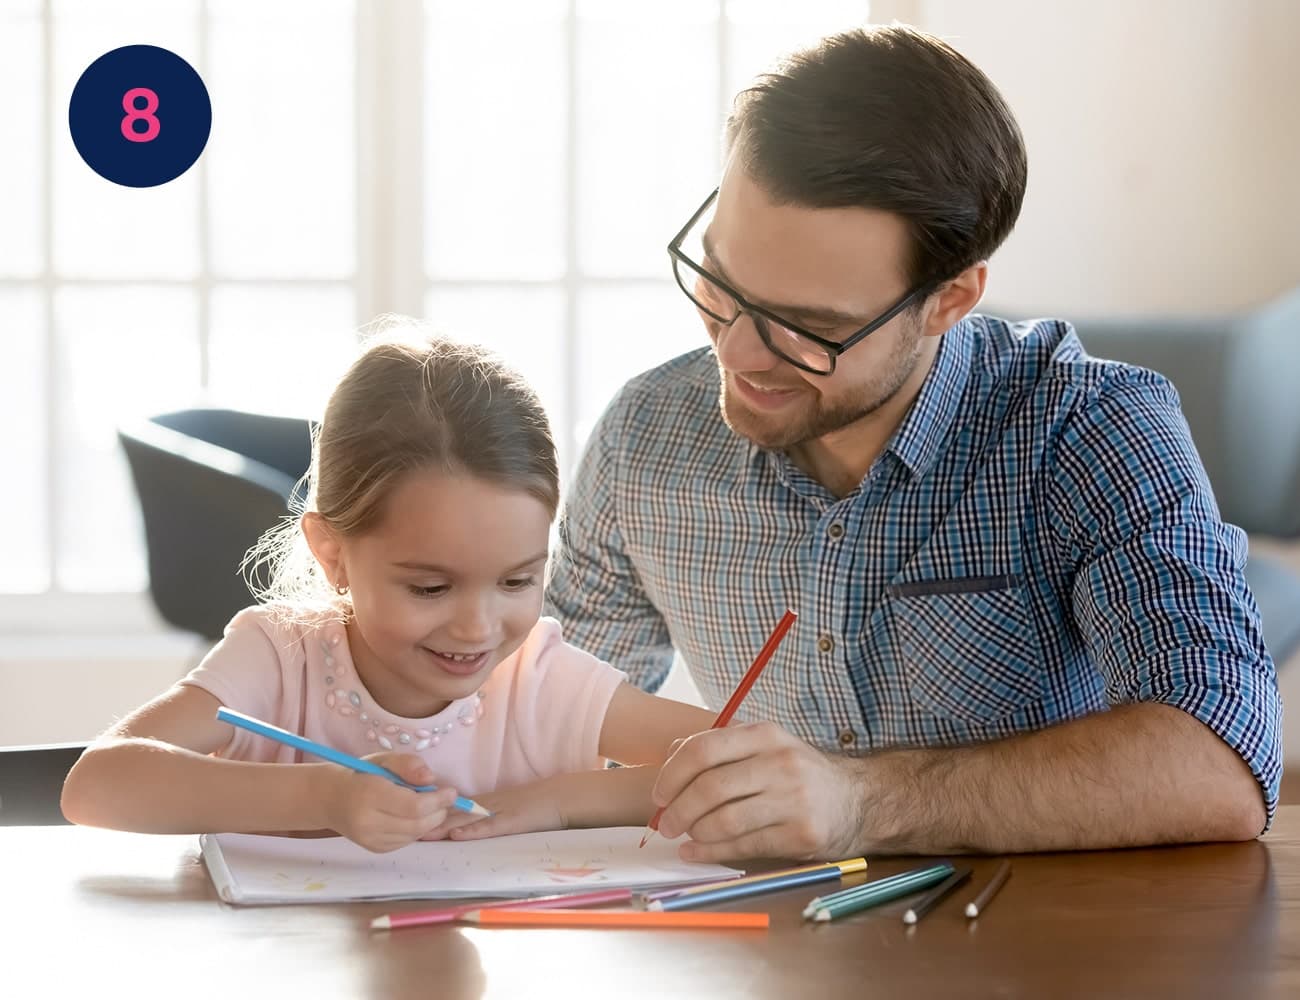 A smiling father and daughter sit at a desk together drawing on paper #Clue: your final hidden letter derives from the Ancient Greek letter alpha. Found your furry friend yet?